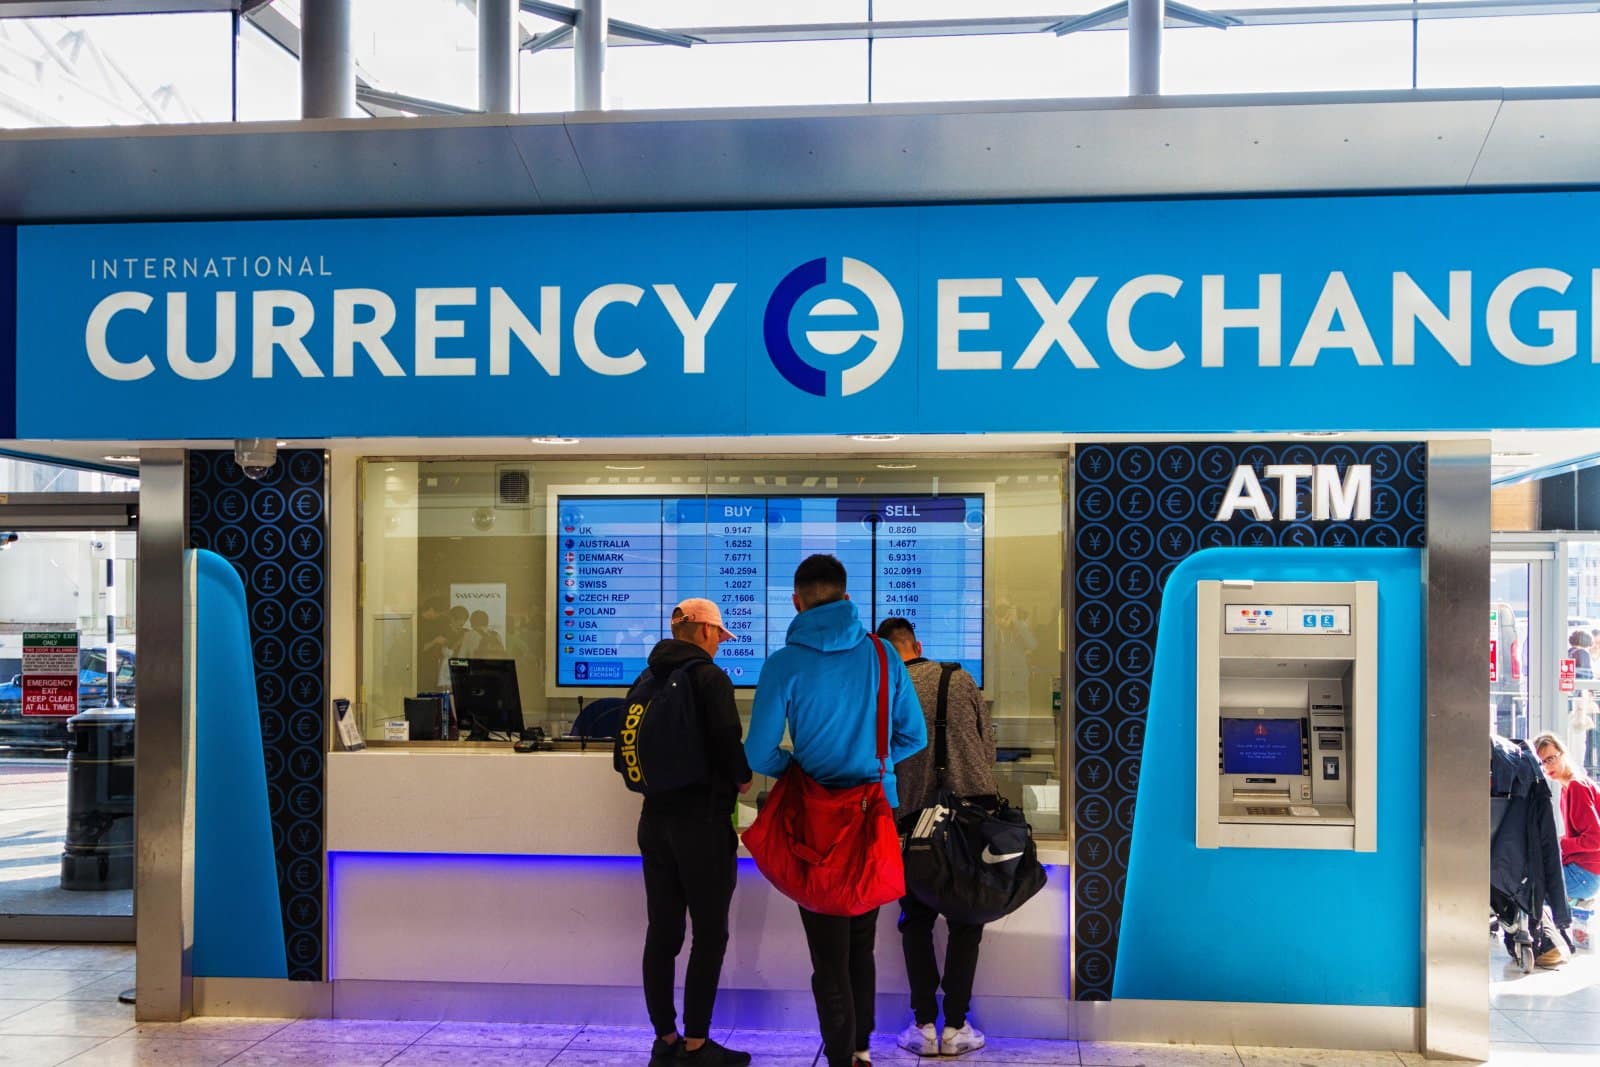 <p class="wp-caption-text">Image Credit: Shutterstock / Milosz Maslanka</p>  <p><span>While a seemingly straightforward transaction, the act of exchanging currency is fraught with pitfalls in areas heavily frequented by tourists. Airports, popular tourist spots, and some hotels offer convenience at a cost, applying exchange rates that significantly benefit the provider. This practice preys on the traveler’s need for local currency upon arrival, often resulting in a disproportionately unfavorable transaction.</span></p>